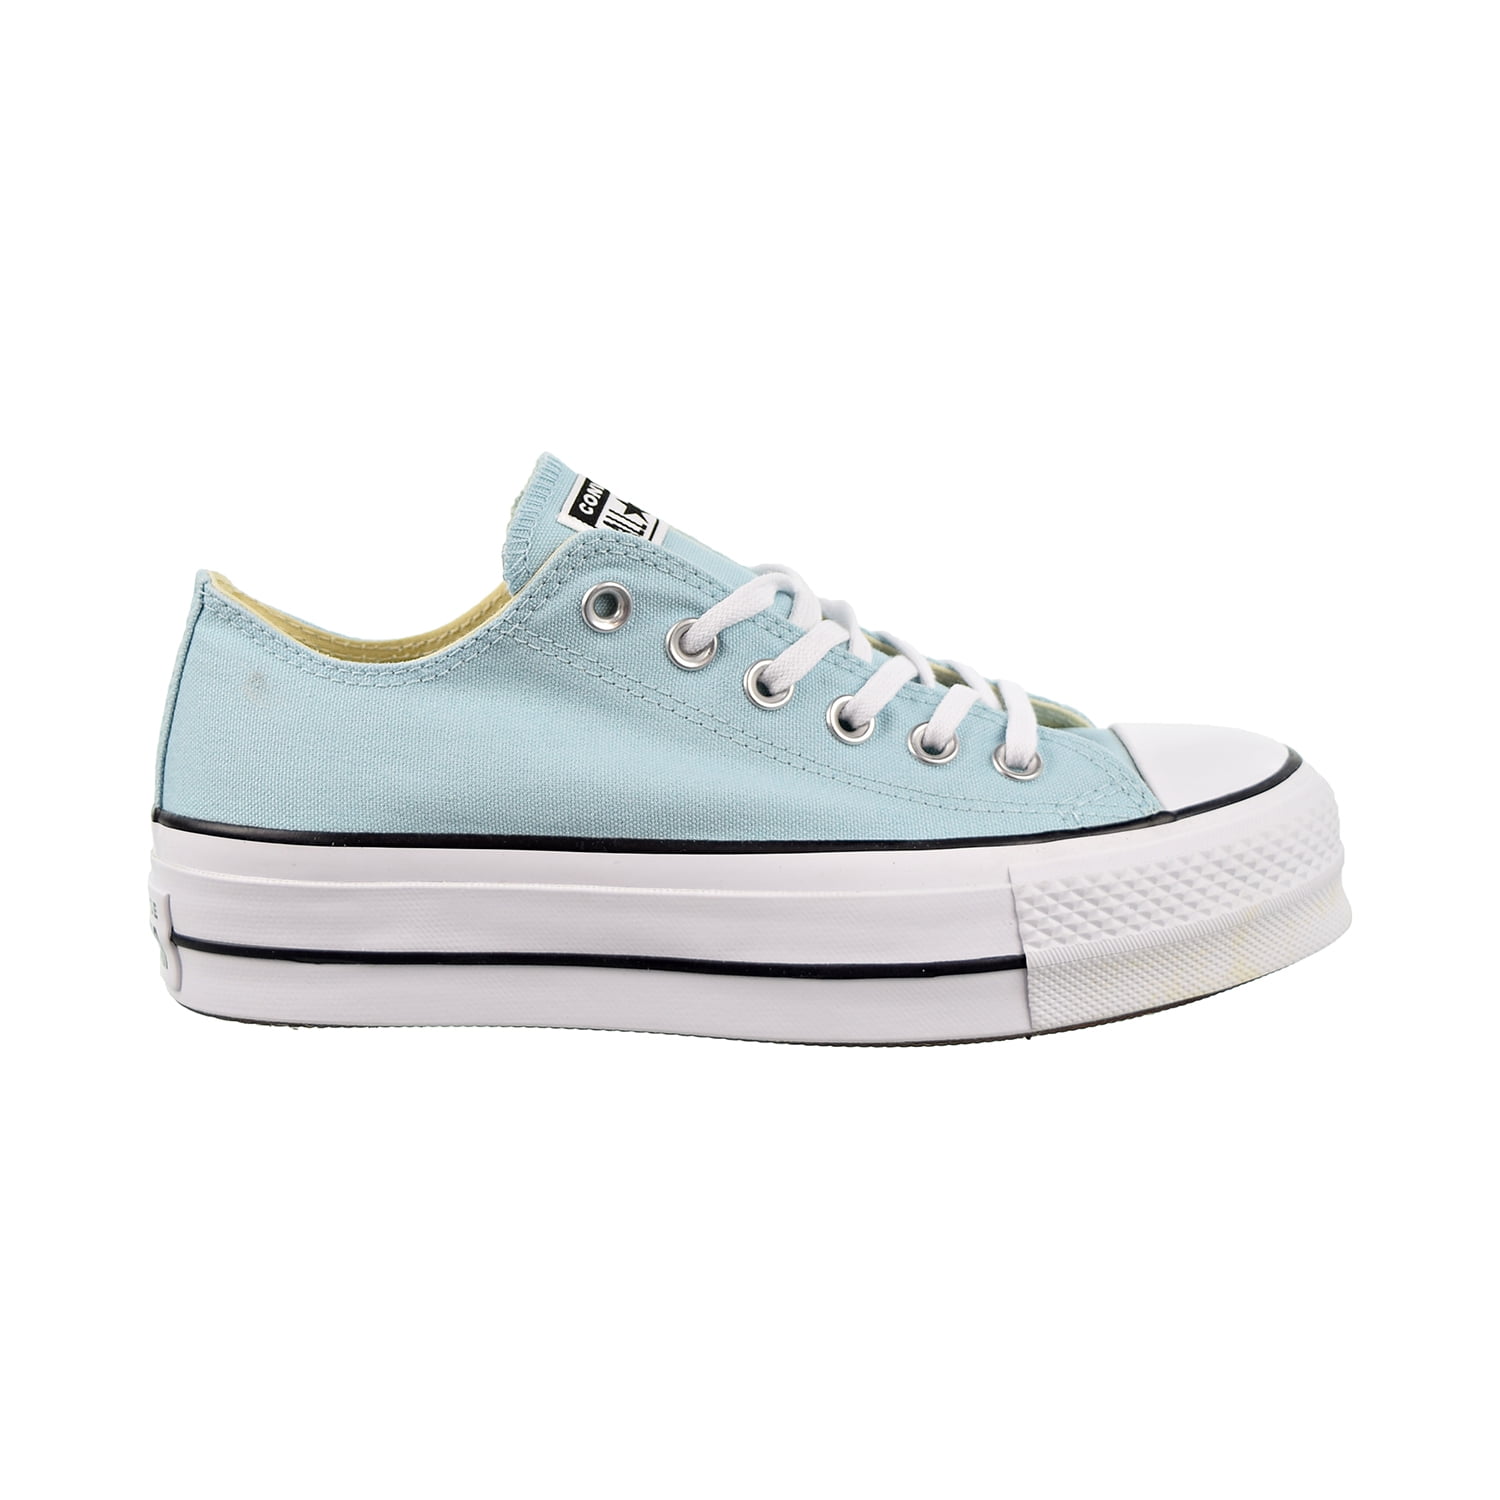 Converse Chuck Taylor All Star Lift OX Womens Shoes Ocean Bliss-White ...